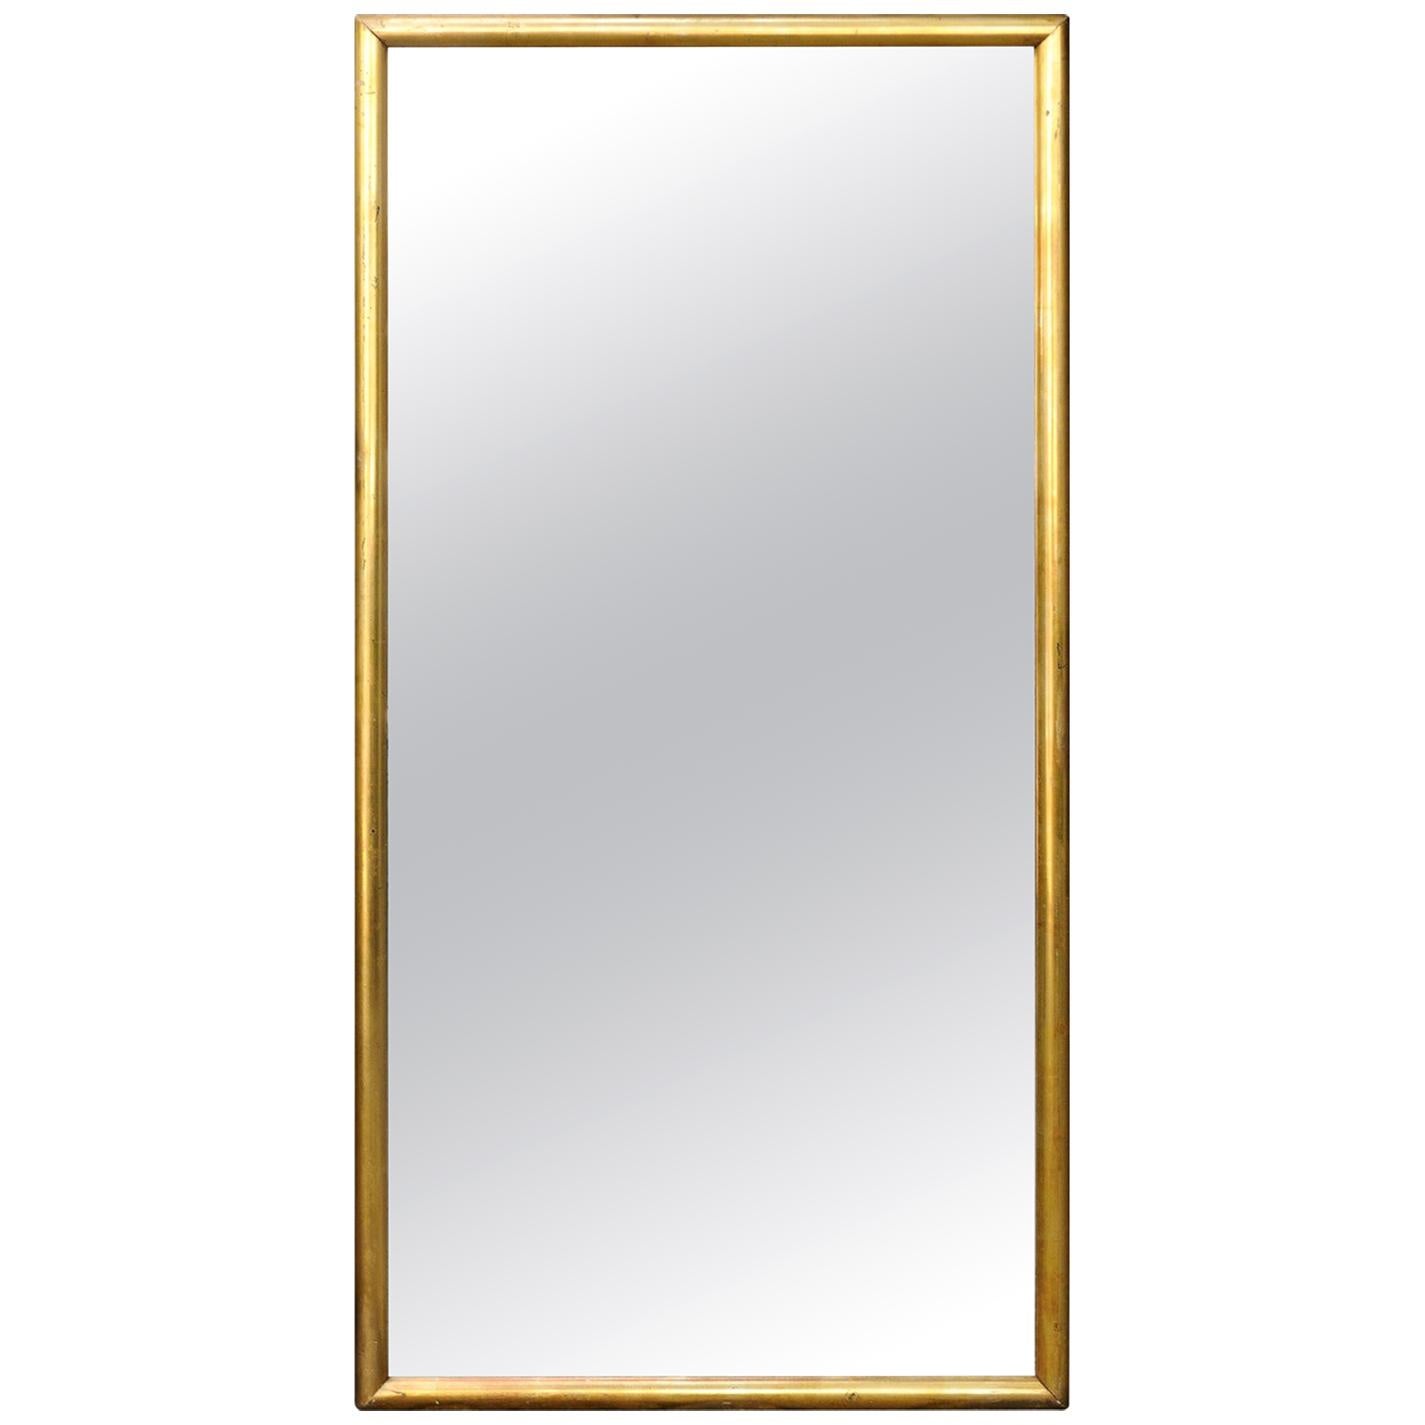 French Turn of the Century 1900s Giltwood Rectangular Mirror with Rounded Edges